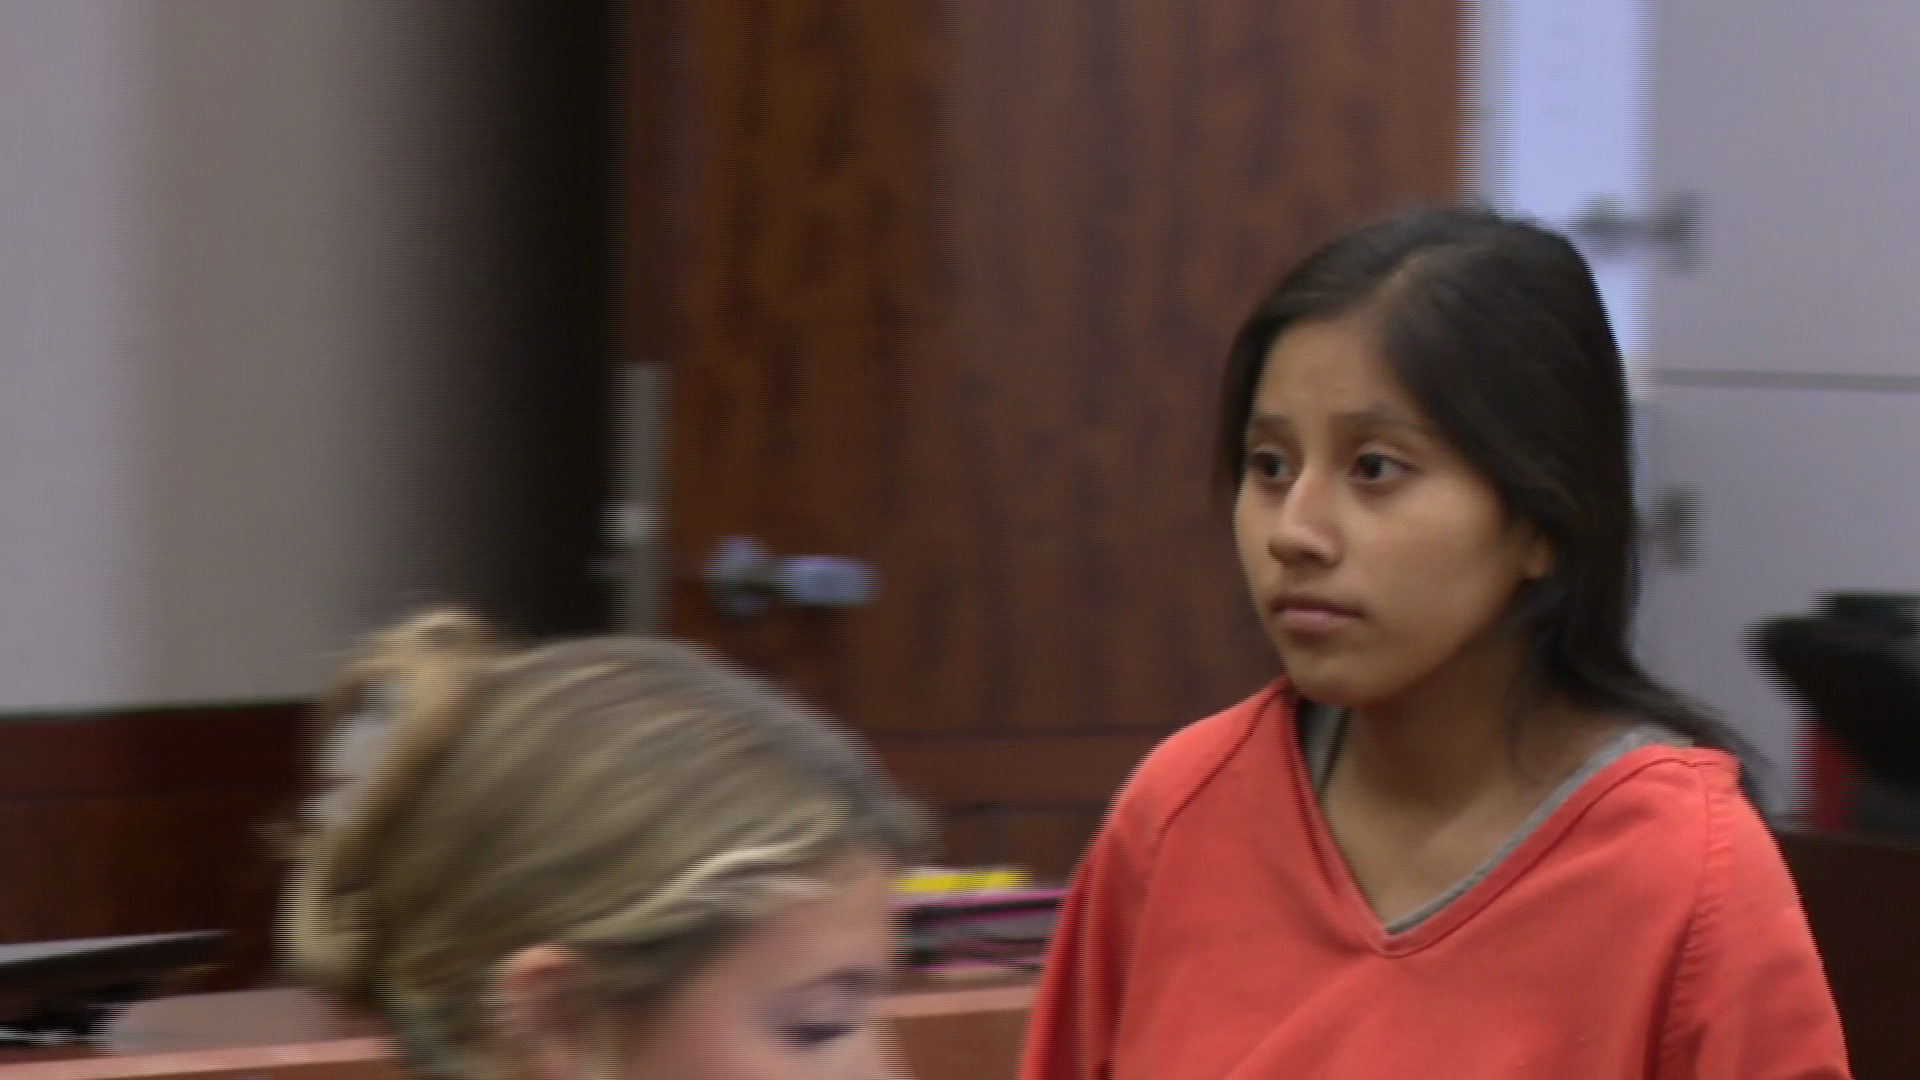 Houston teen mother charged for abandoning baby in trash bag: Bond set at $200K